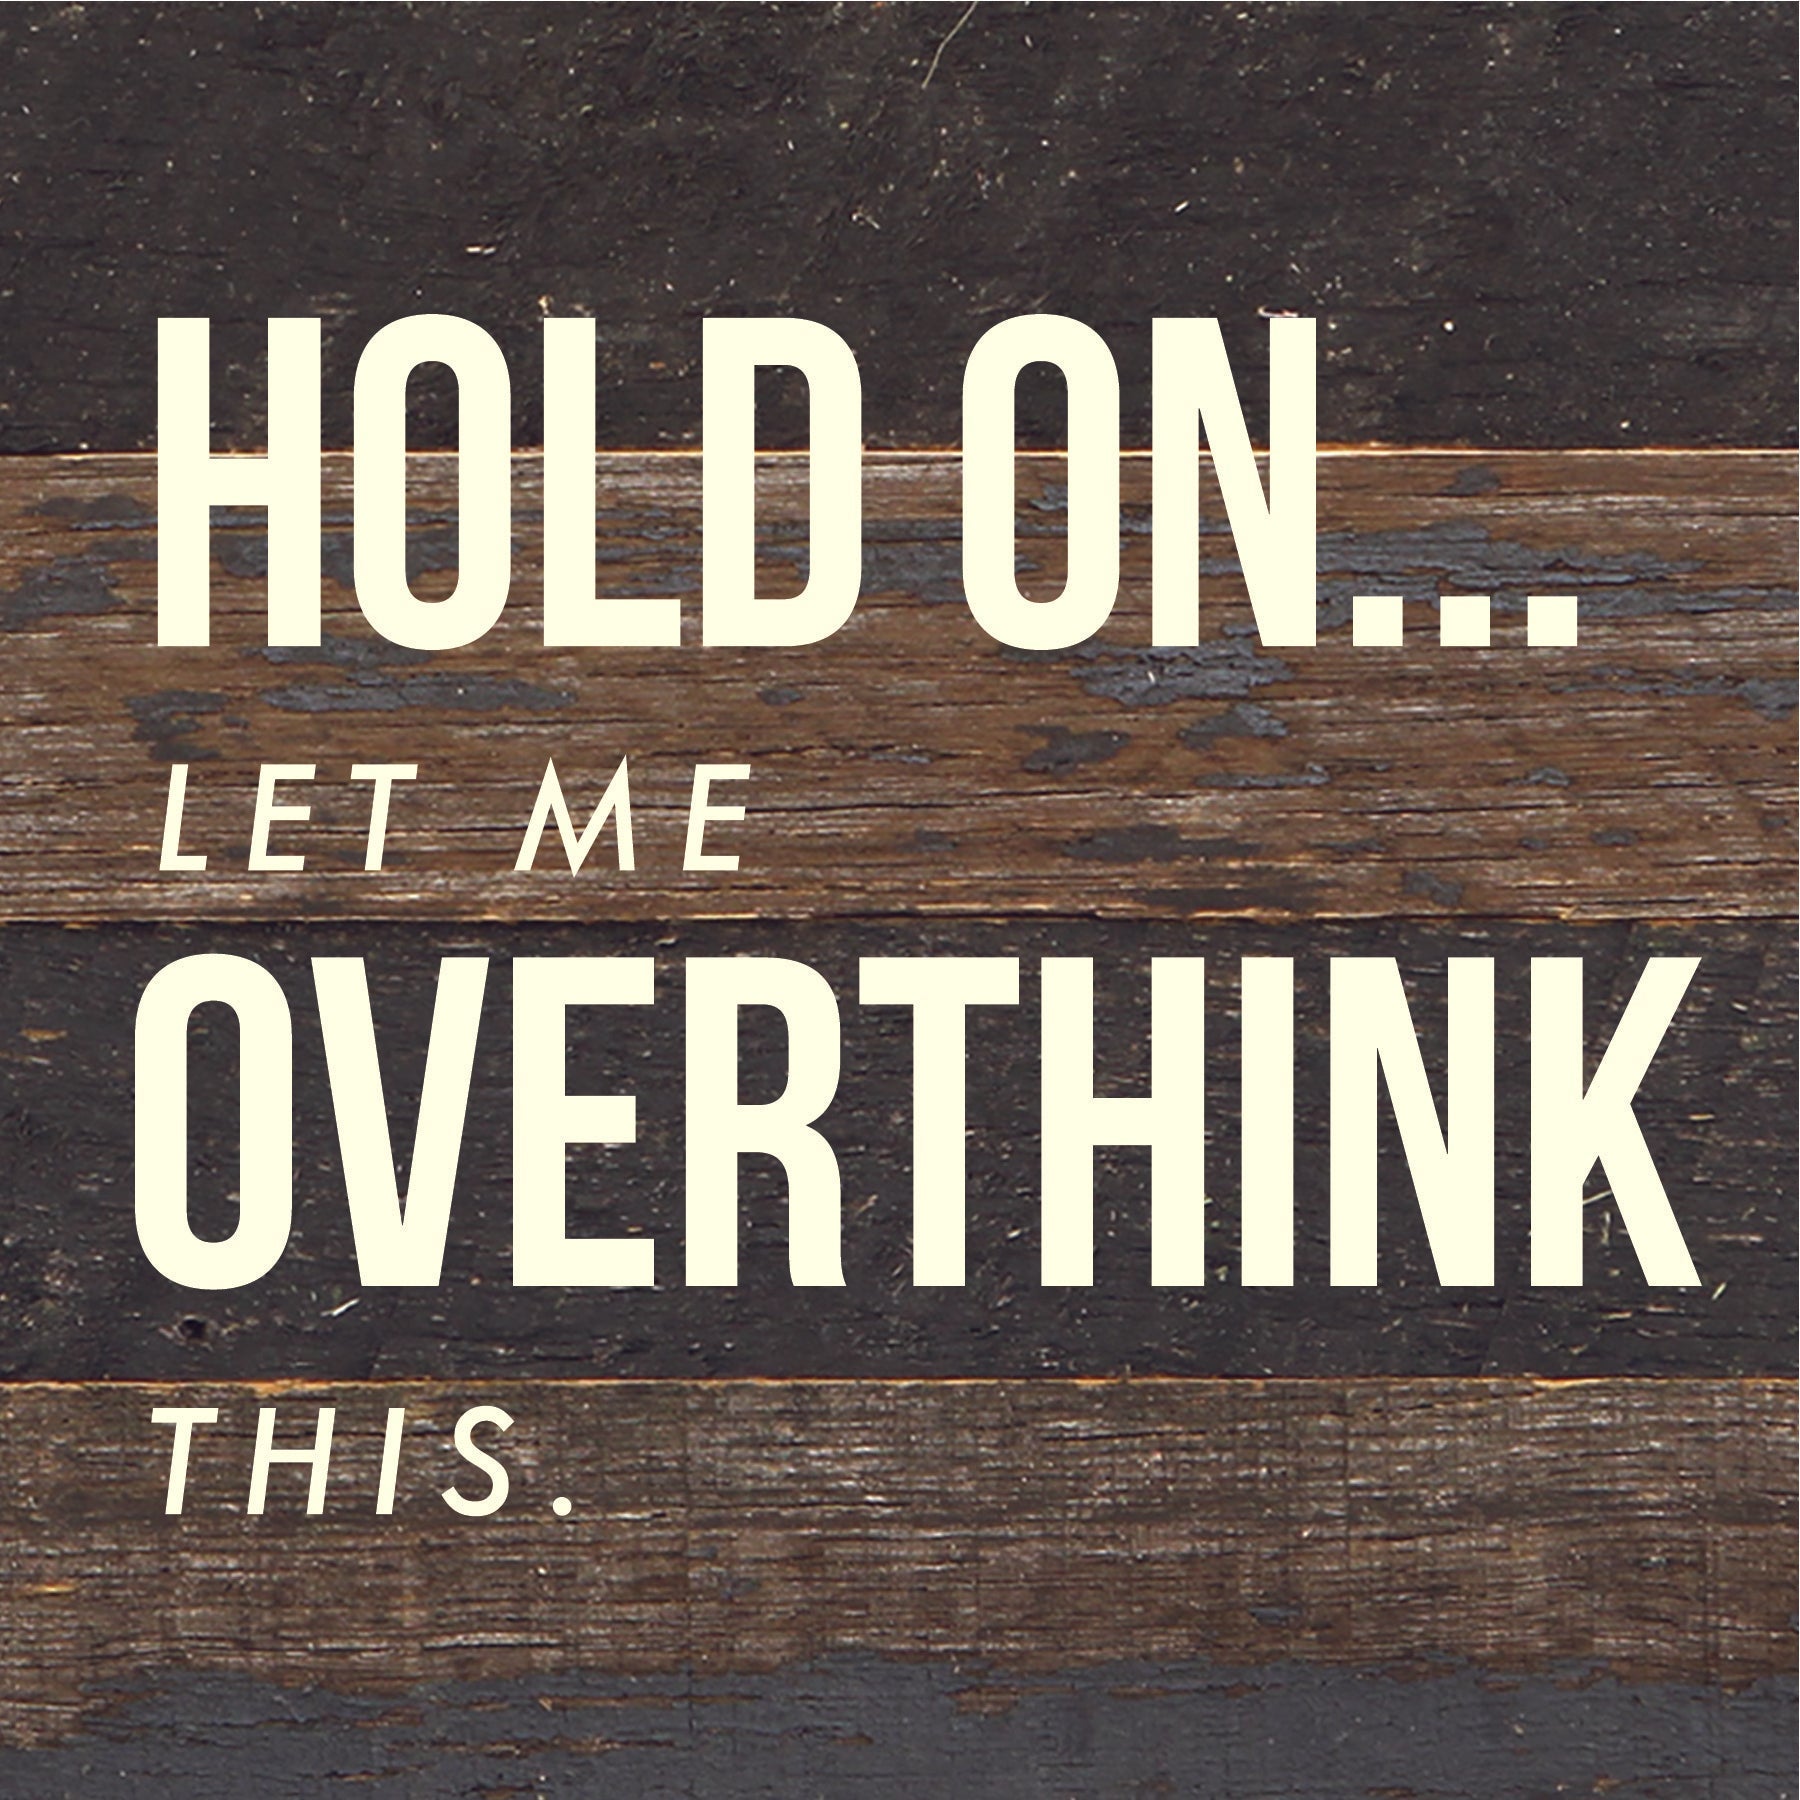 Hold on... Let me overthink this / 6x6 Reclaimed Wood Sign